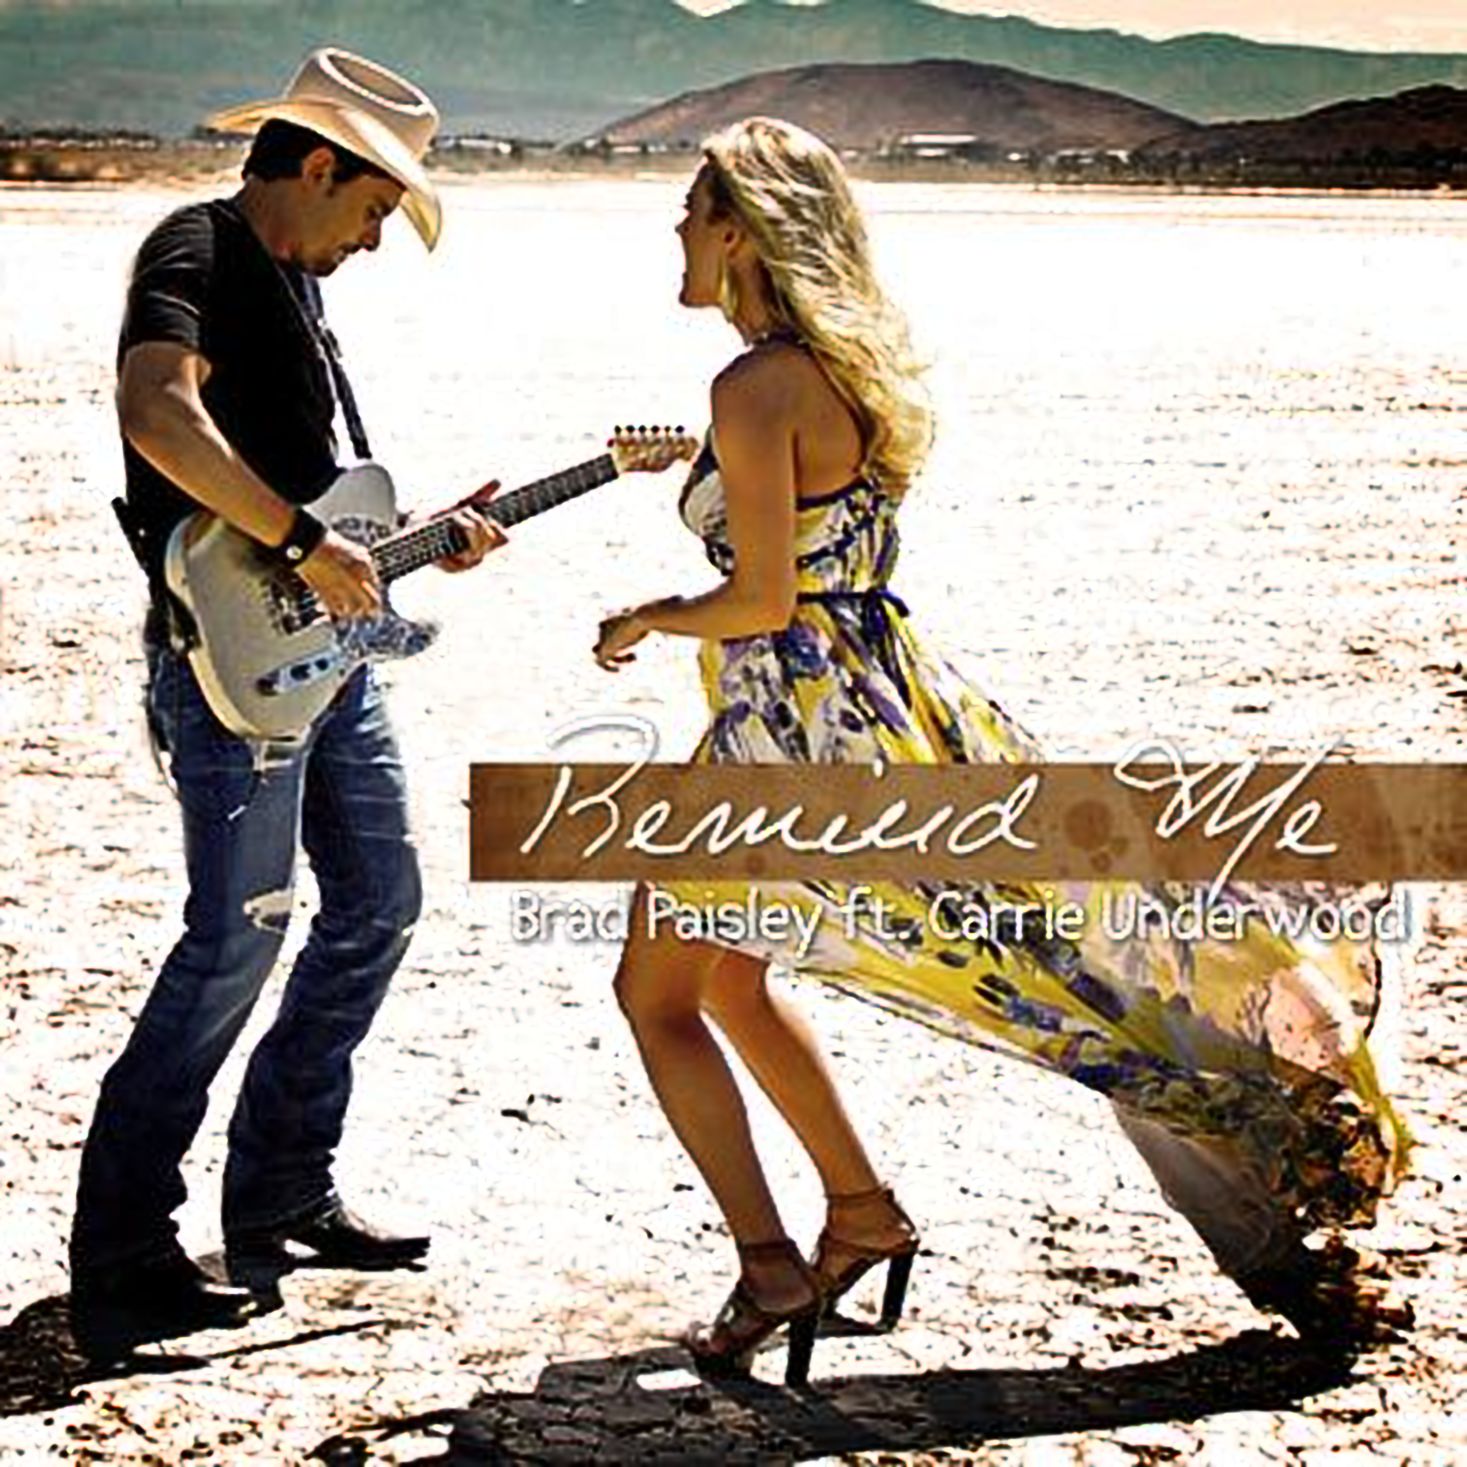 Brad Paisley – Remind Me (ft. Carrie Underwood)